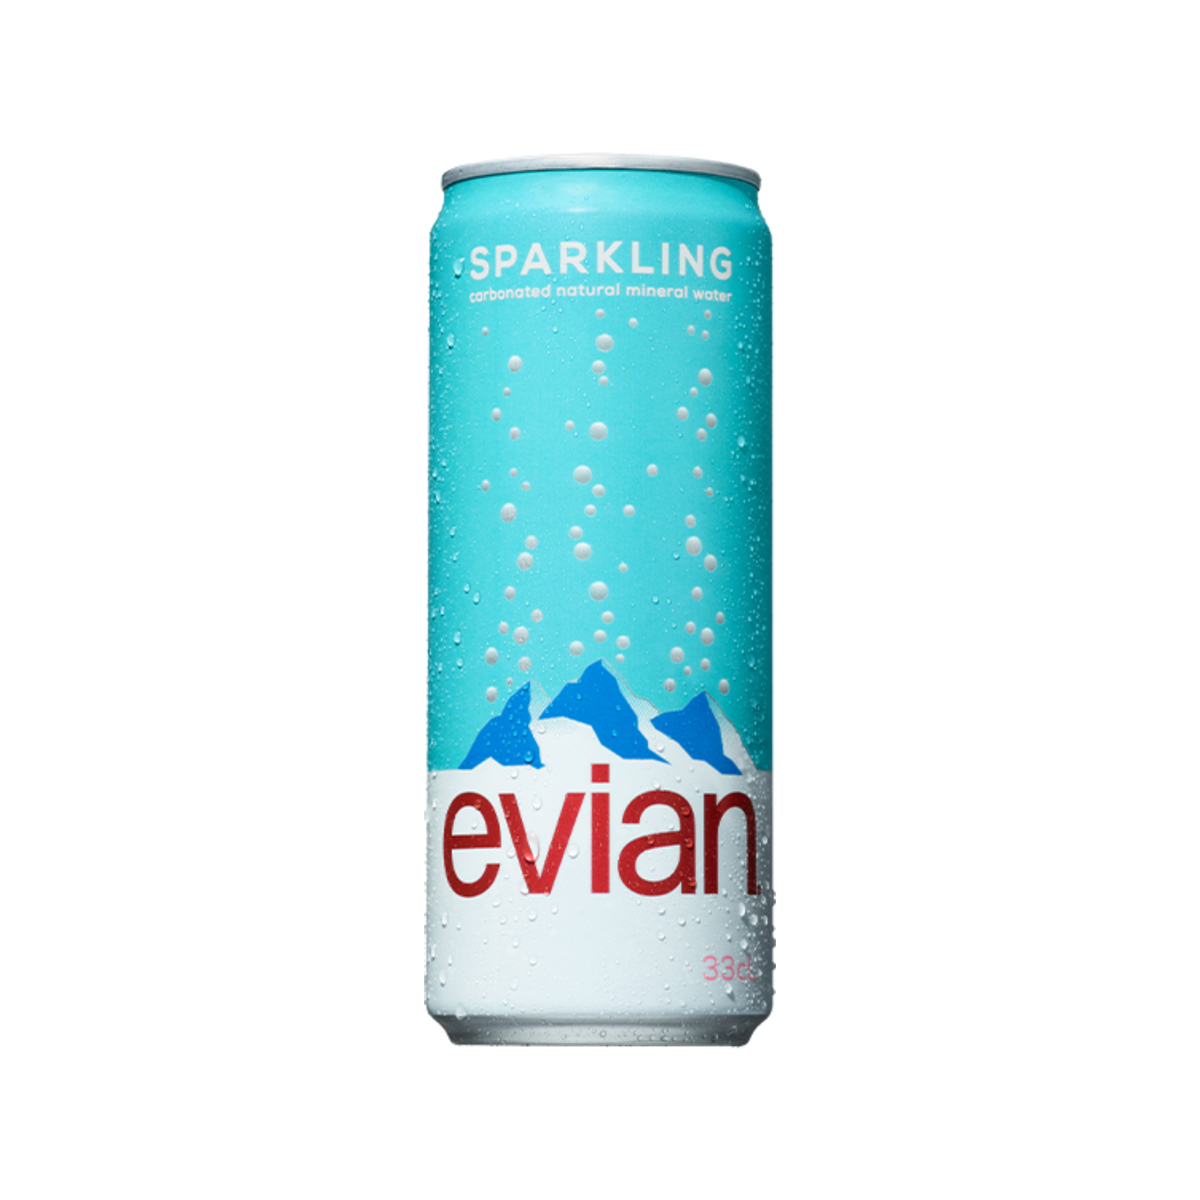 Evian Sparkling Mineral Water 330 ml